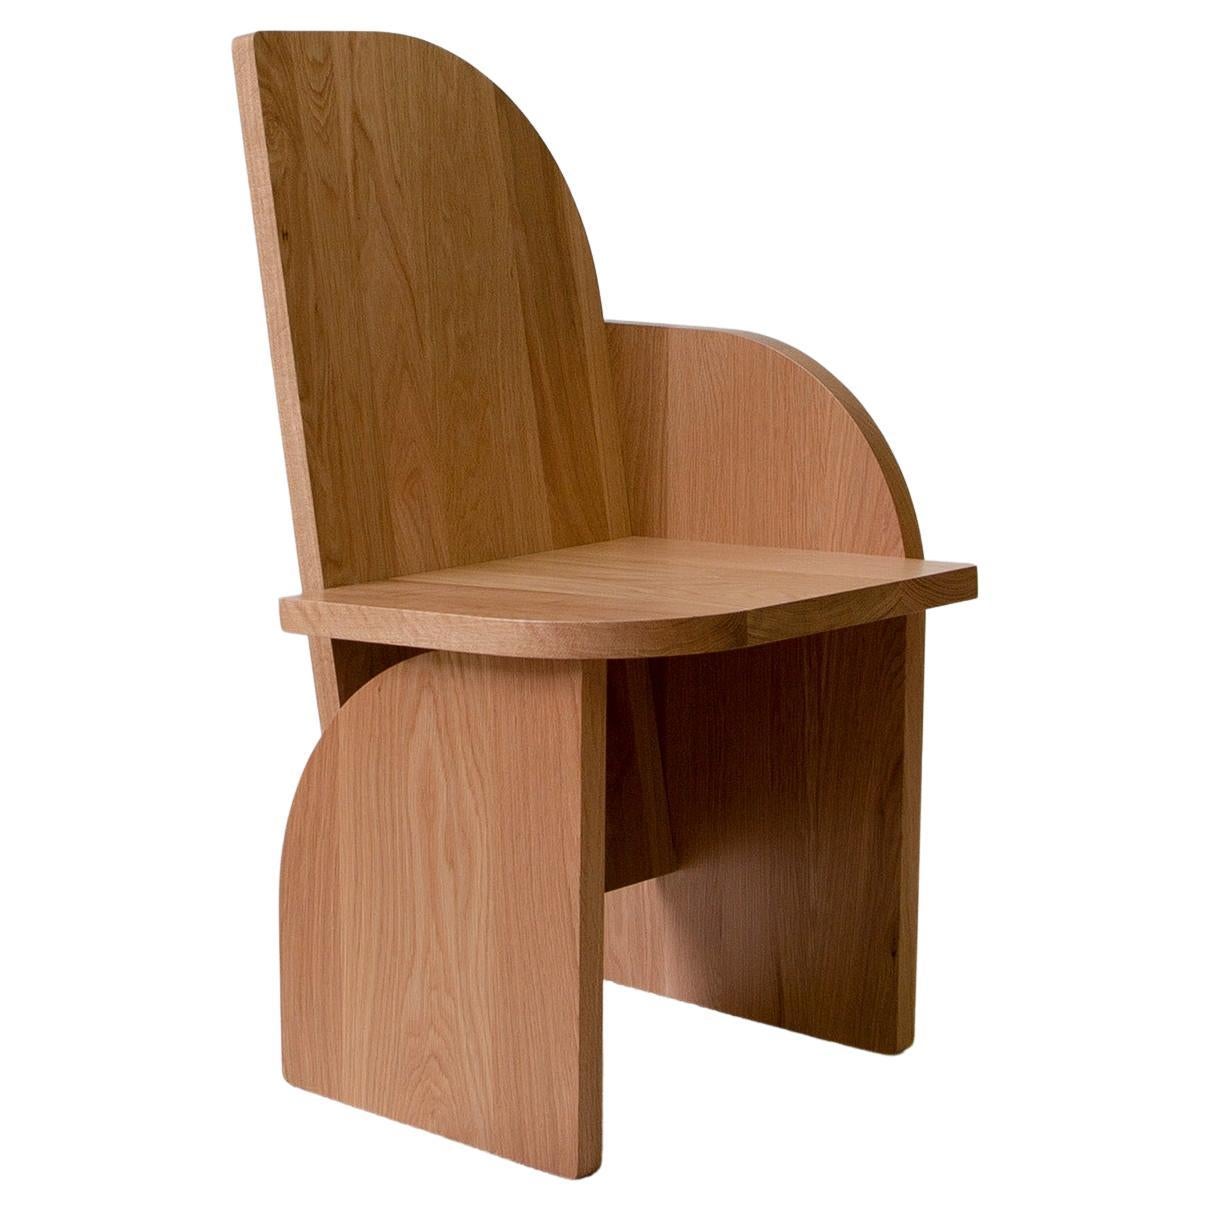 Solid Wood Sculptural Accent Side Chair, Bluff Side Chair Left, White Oak For Sale